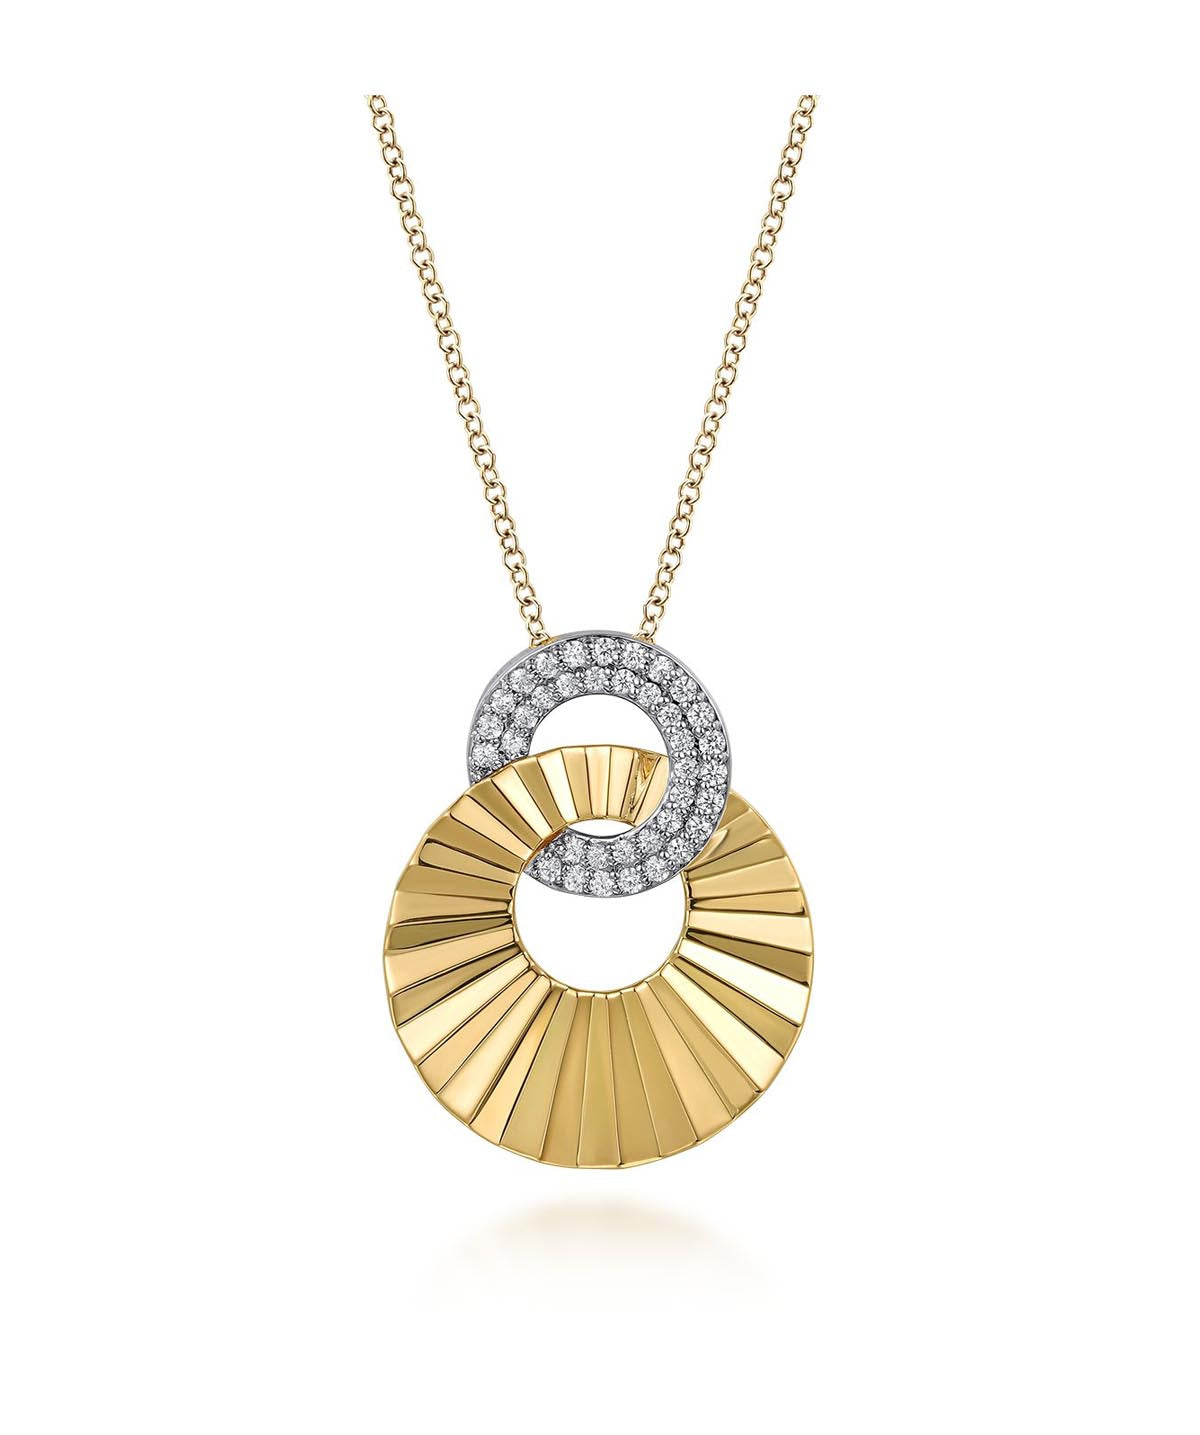 14K White and Yellow Gold Diamond Cut Drop Pendant Necklace